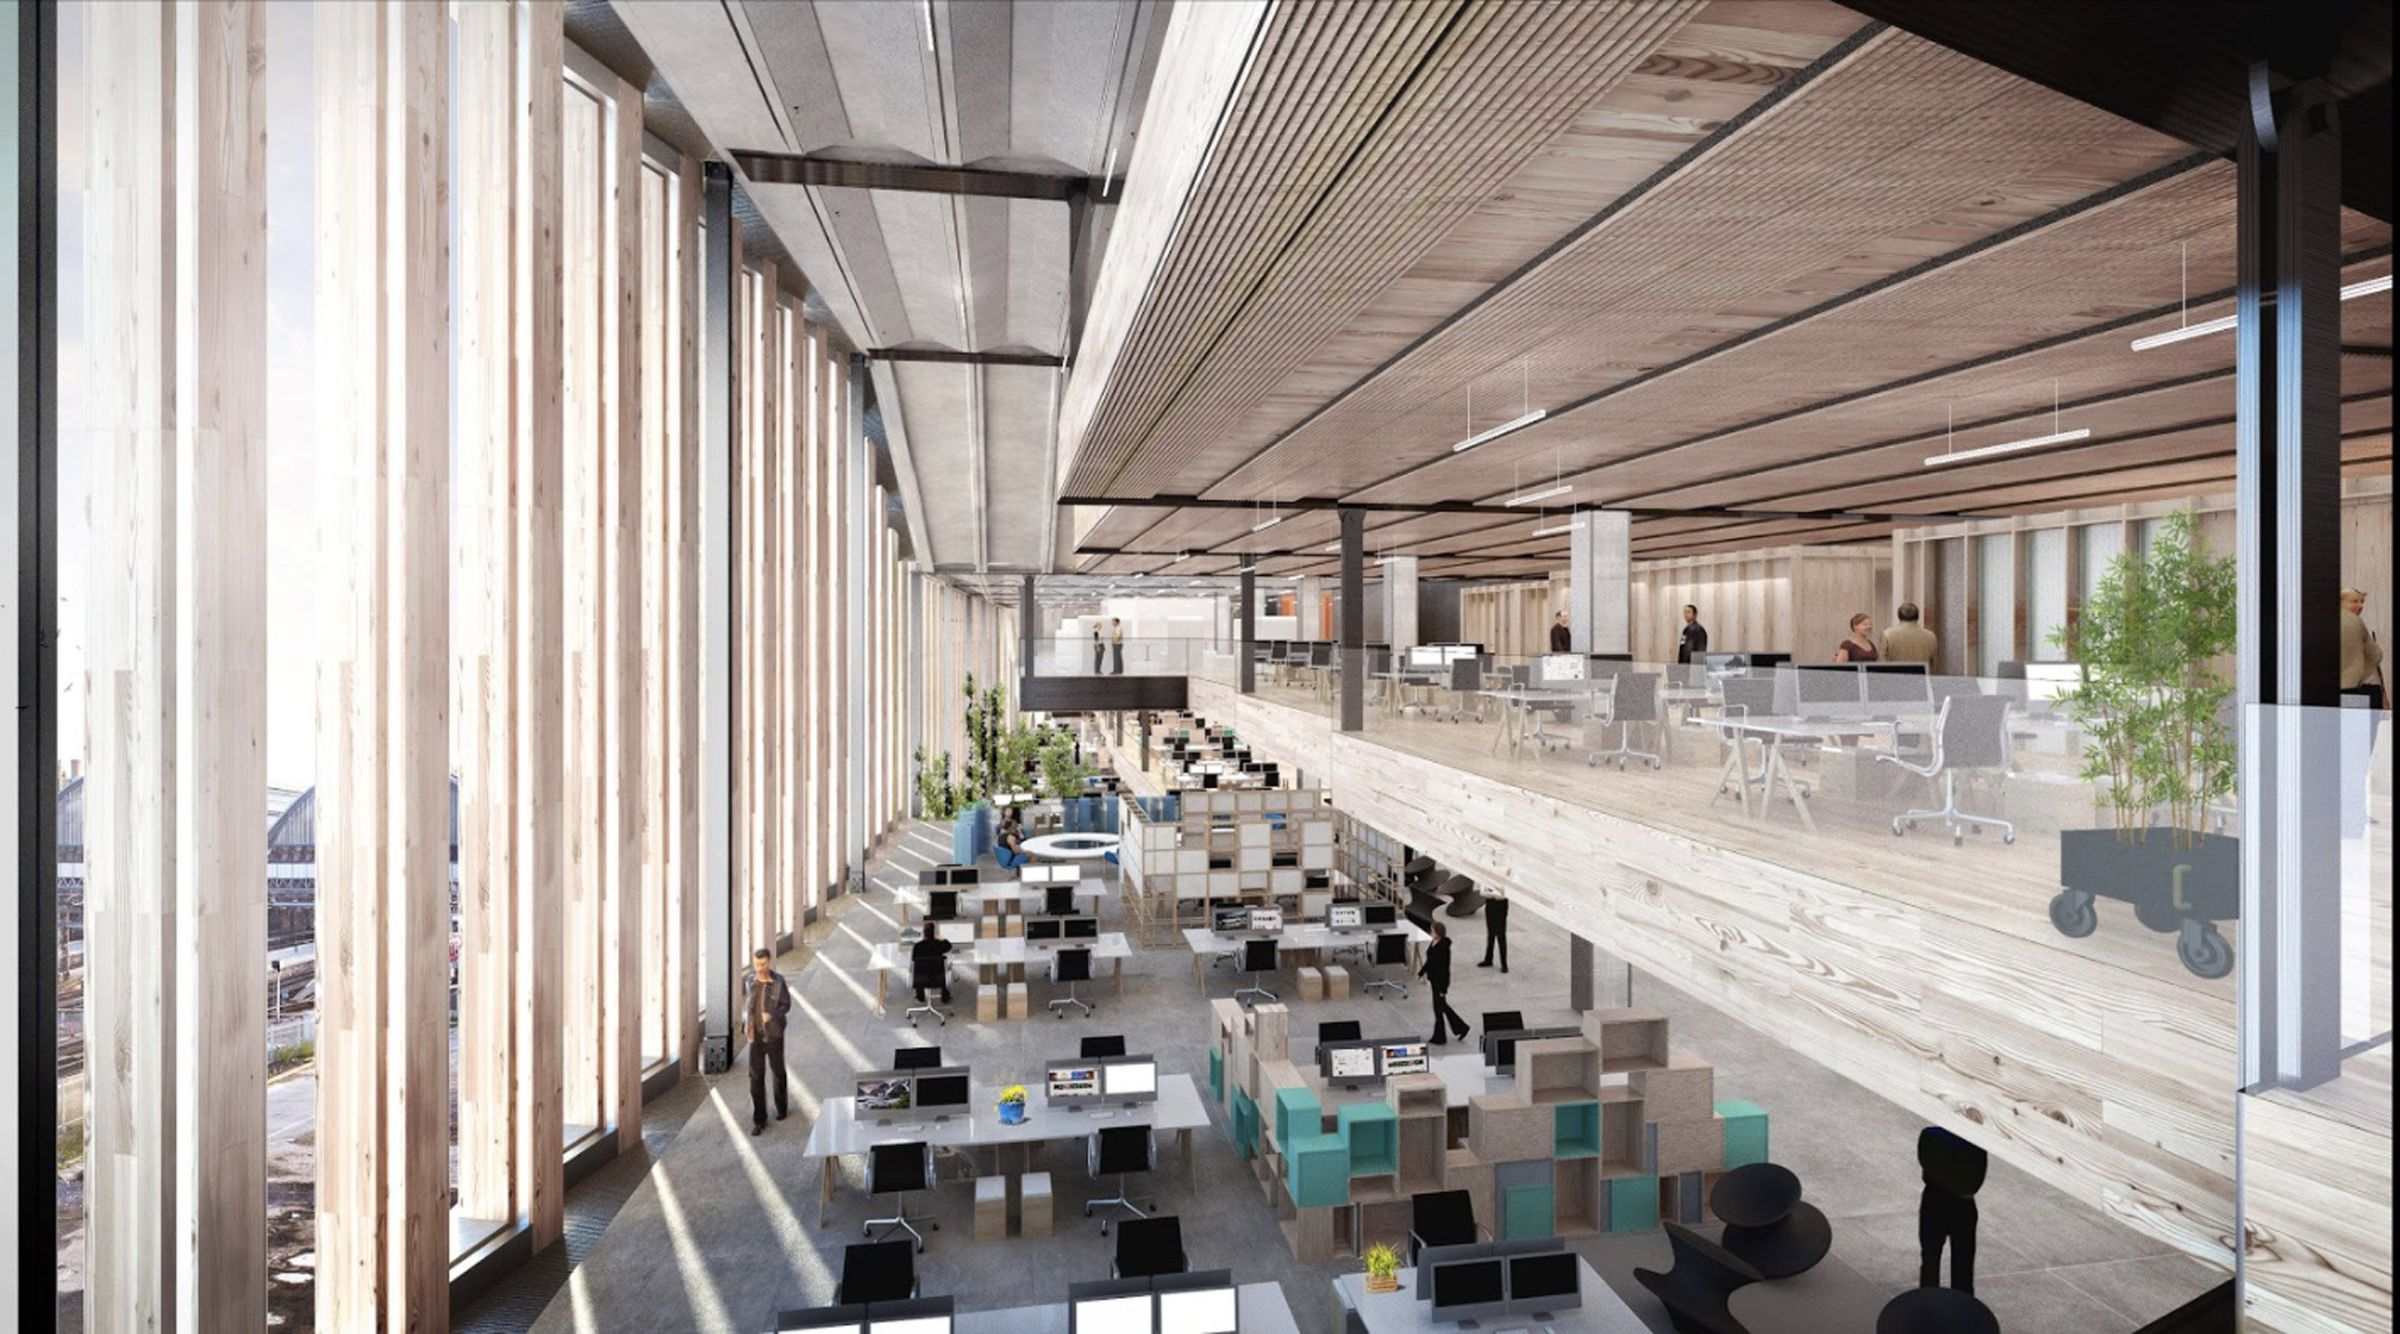 The interior of the building will be mainly given over to open-plan offices.